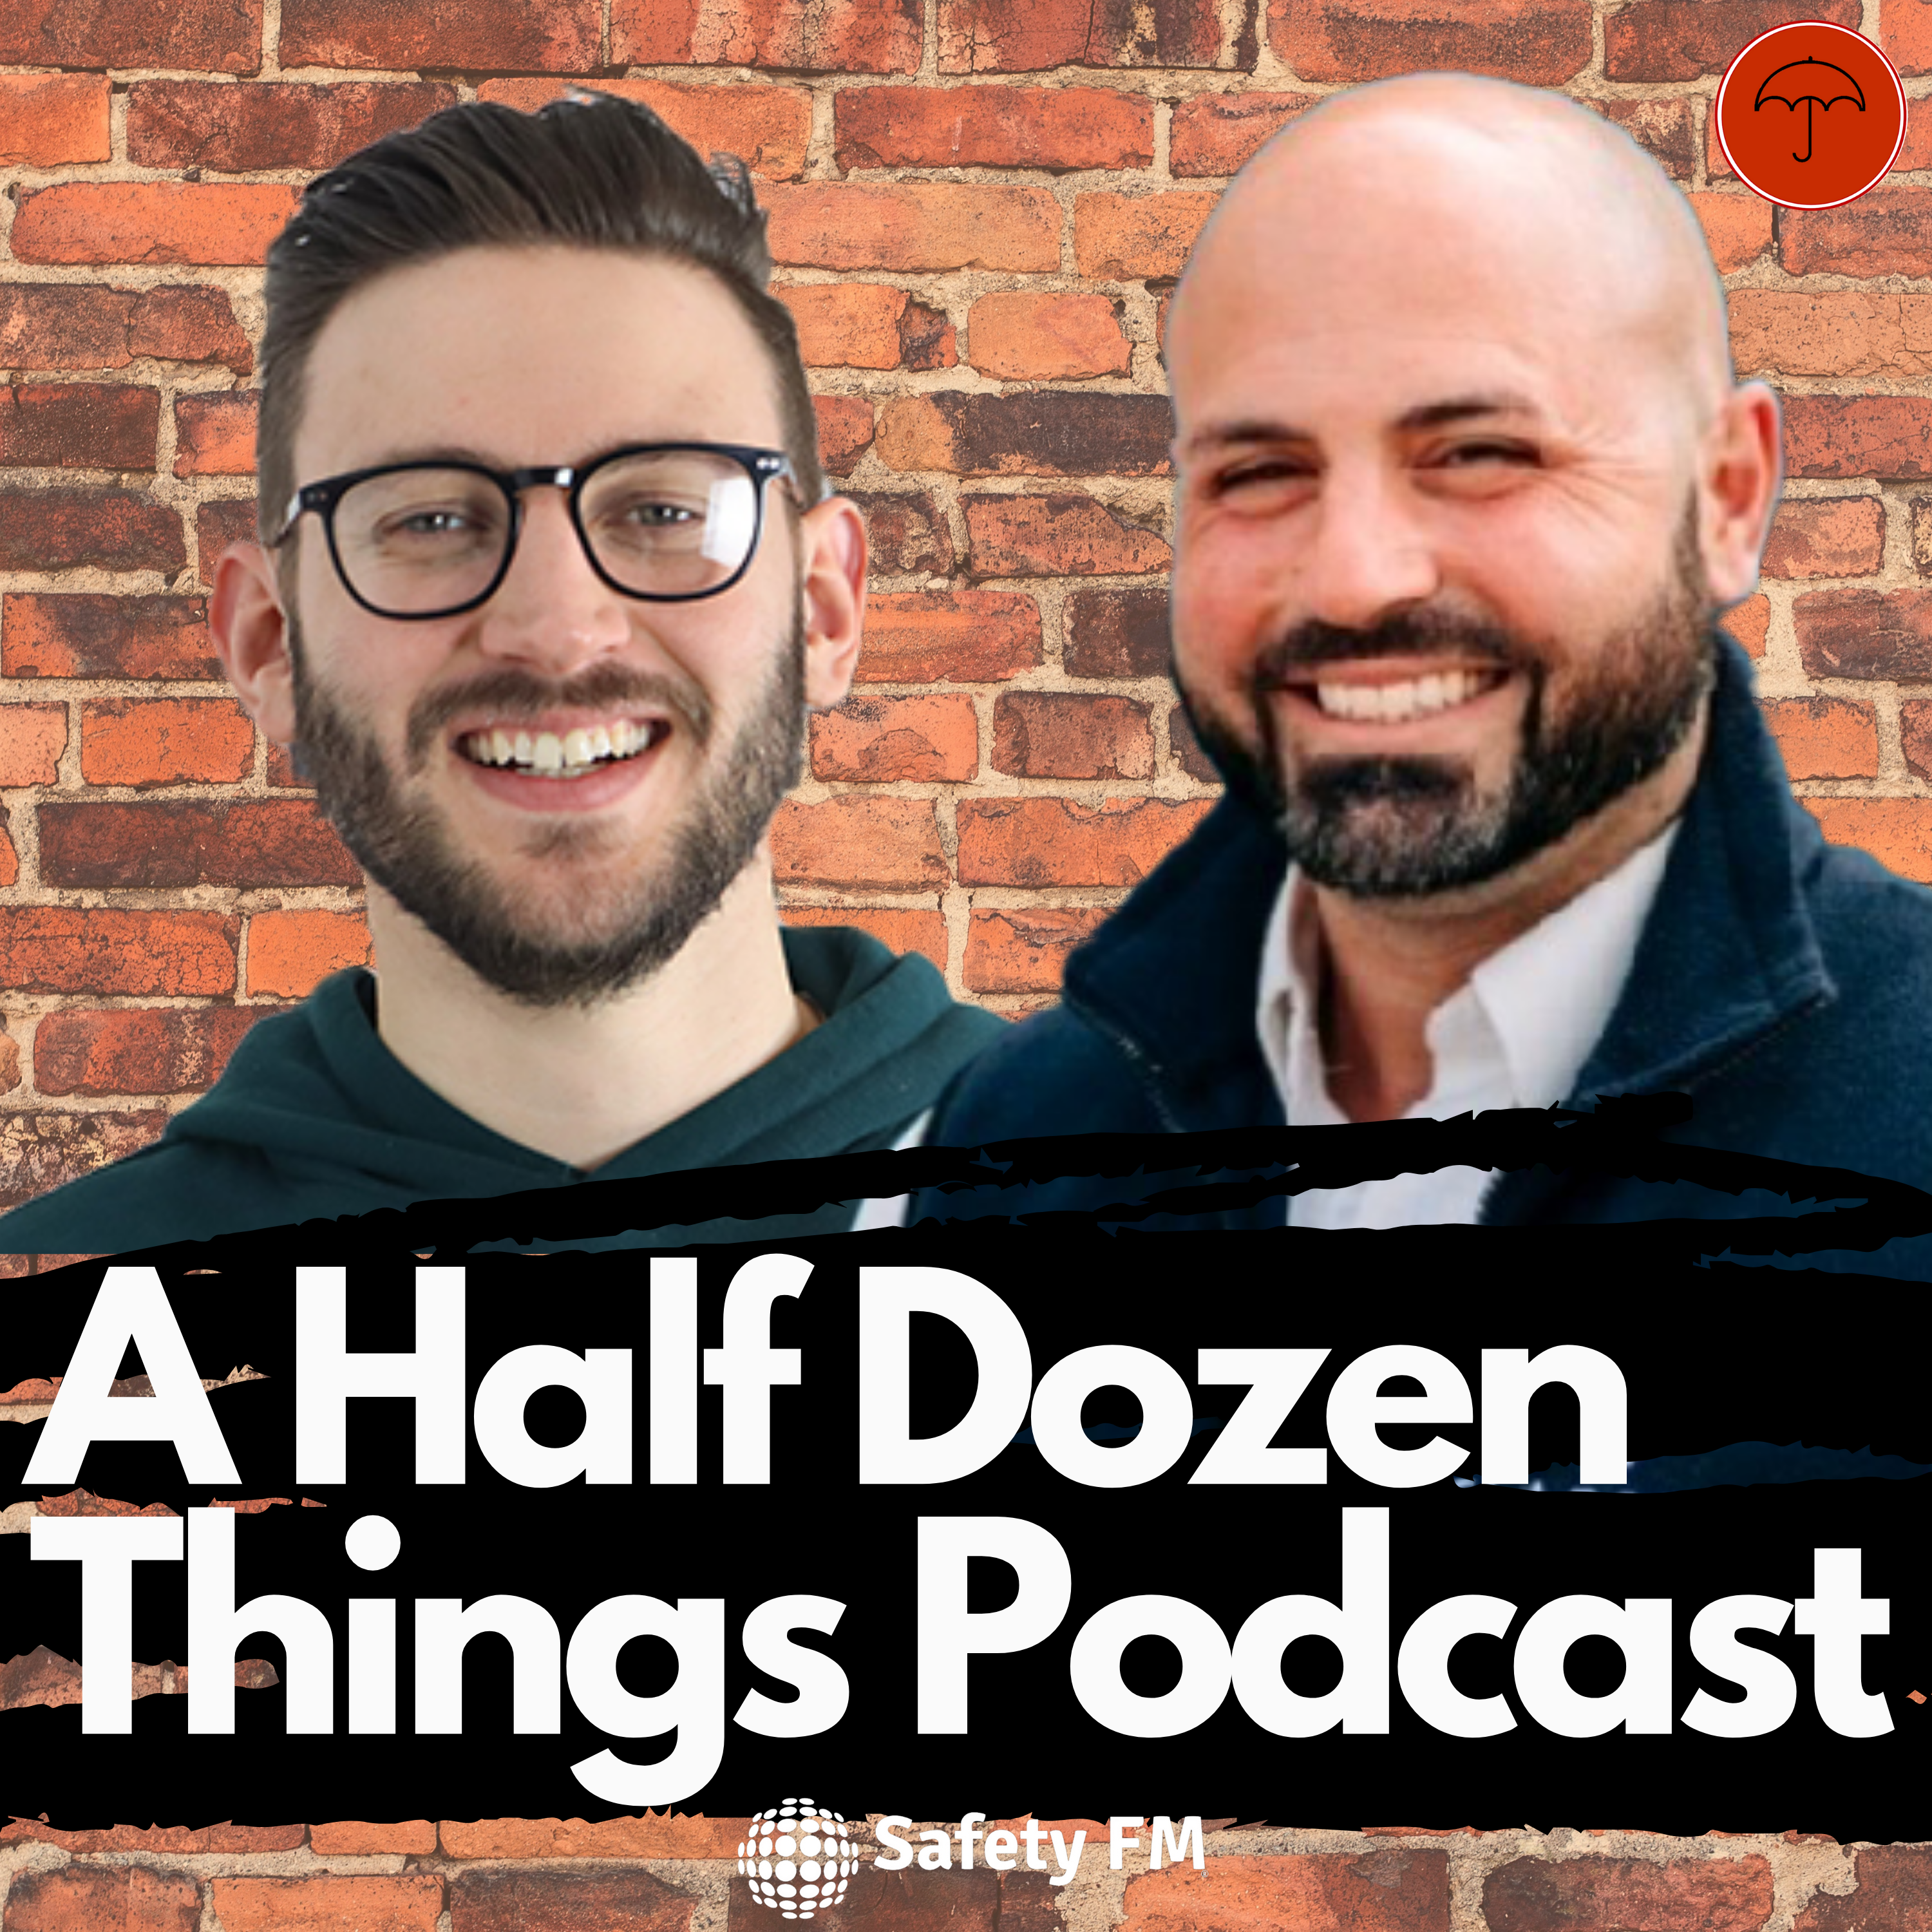 A Half Dozen Things Podcast - Pete Rushmer and James MacP